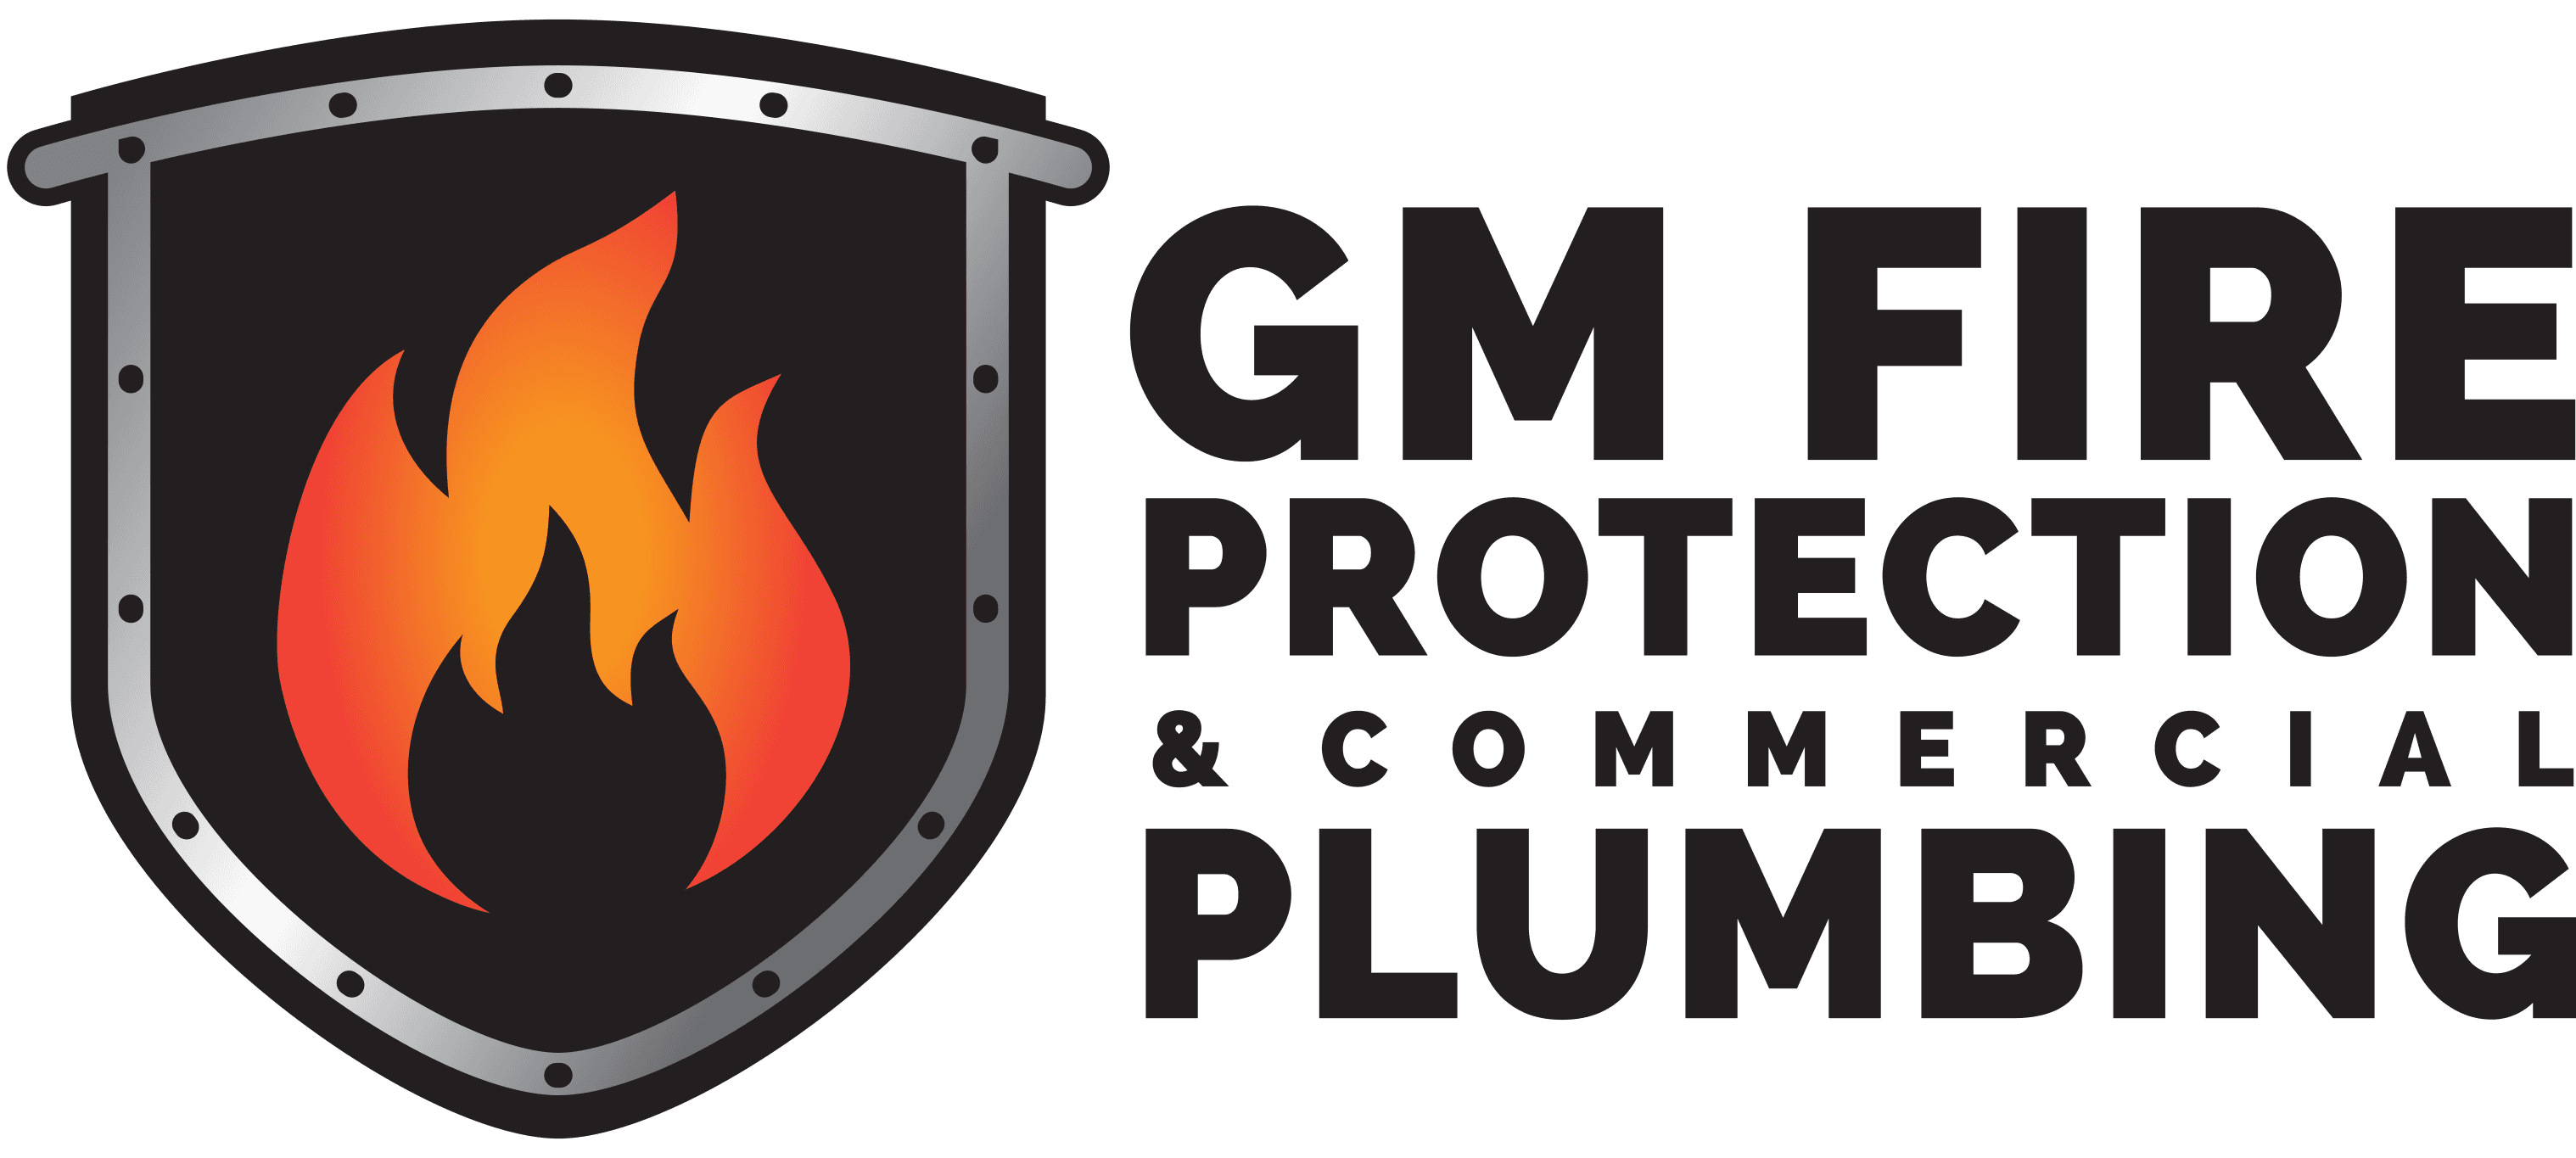 GM Fire protection-logo